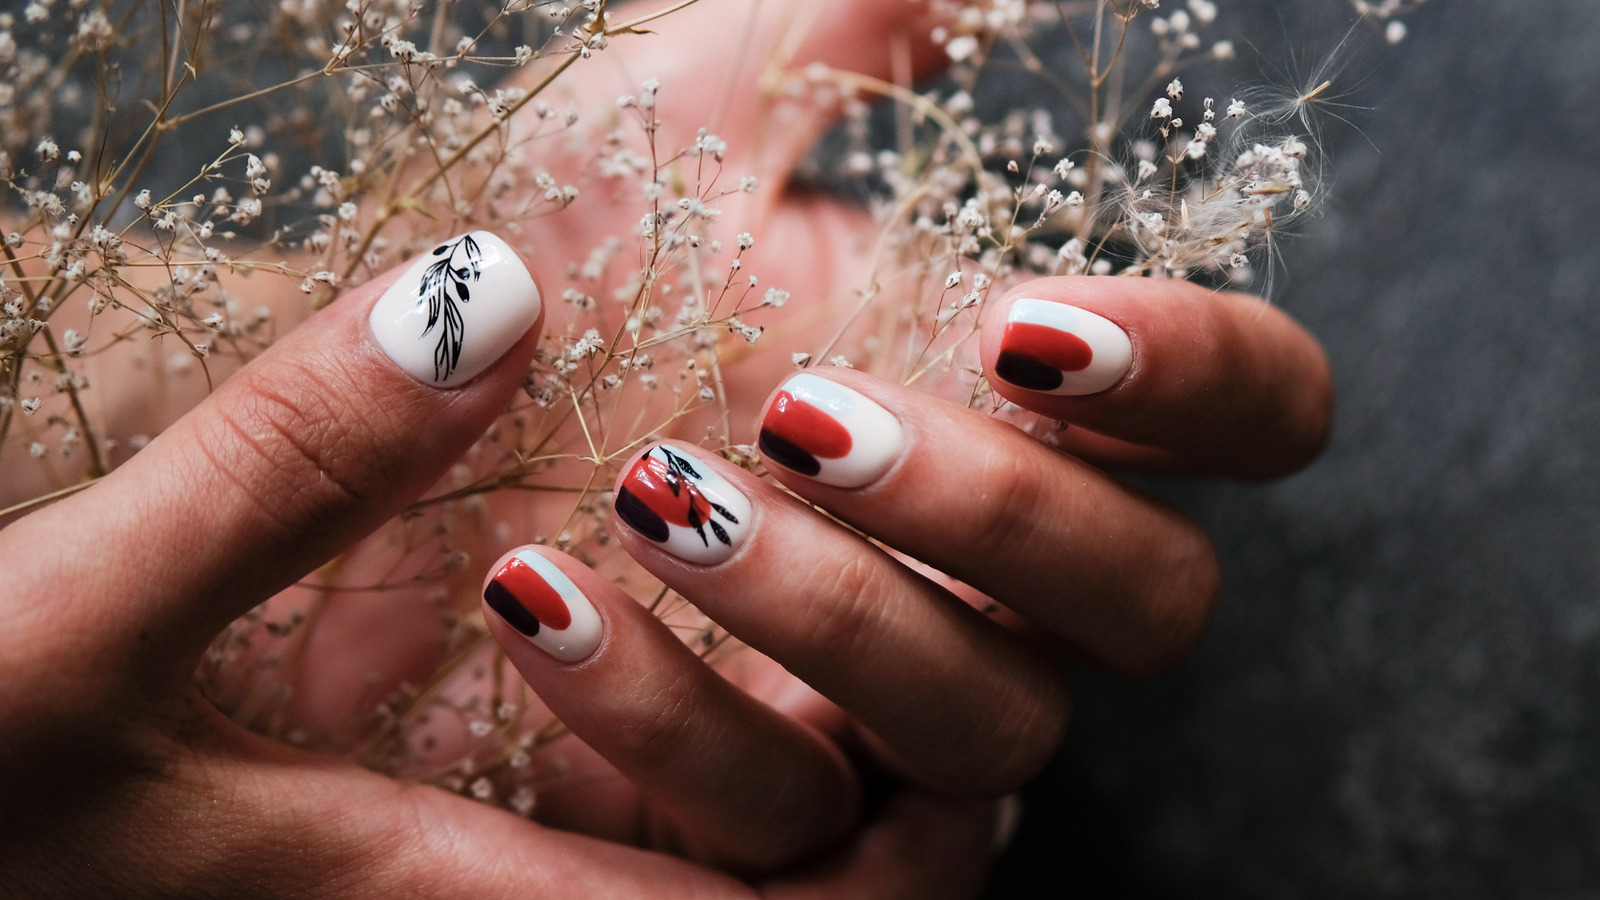 6. 25 Abstract Nail Art Designs That Will Make Your Nails Stand Out - wide 9